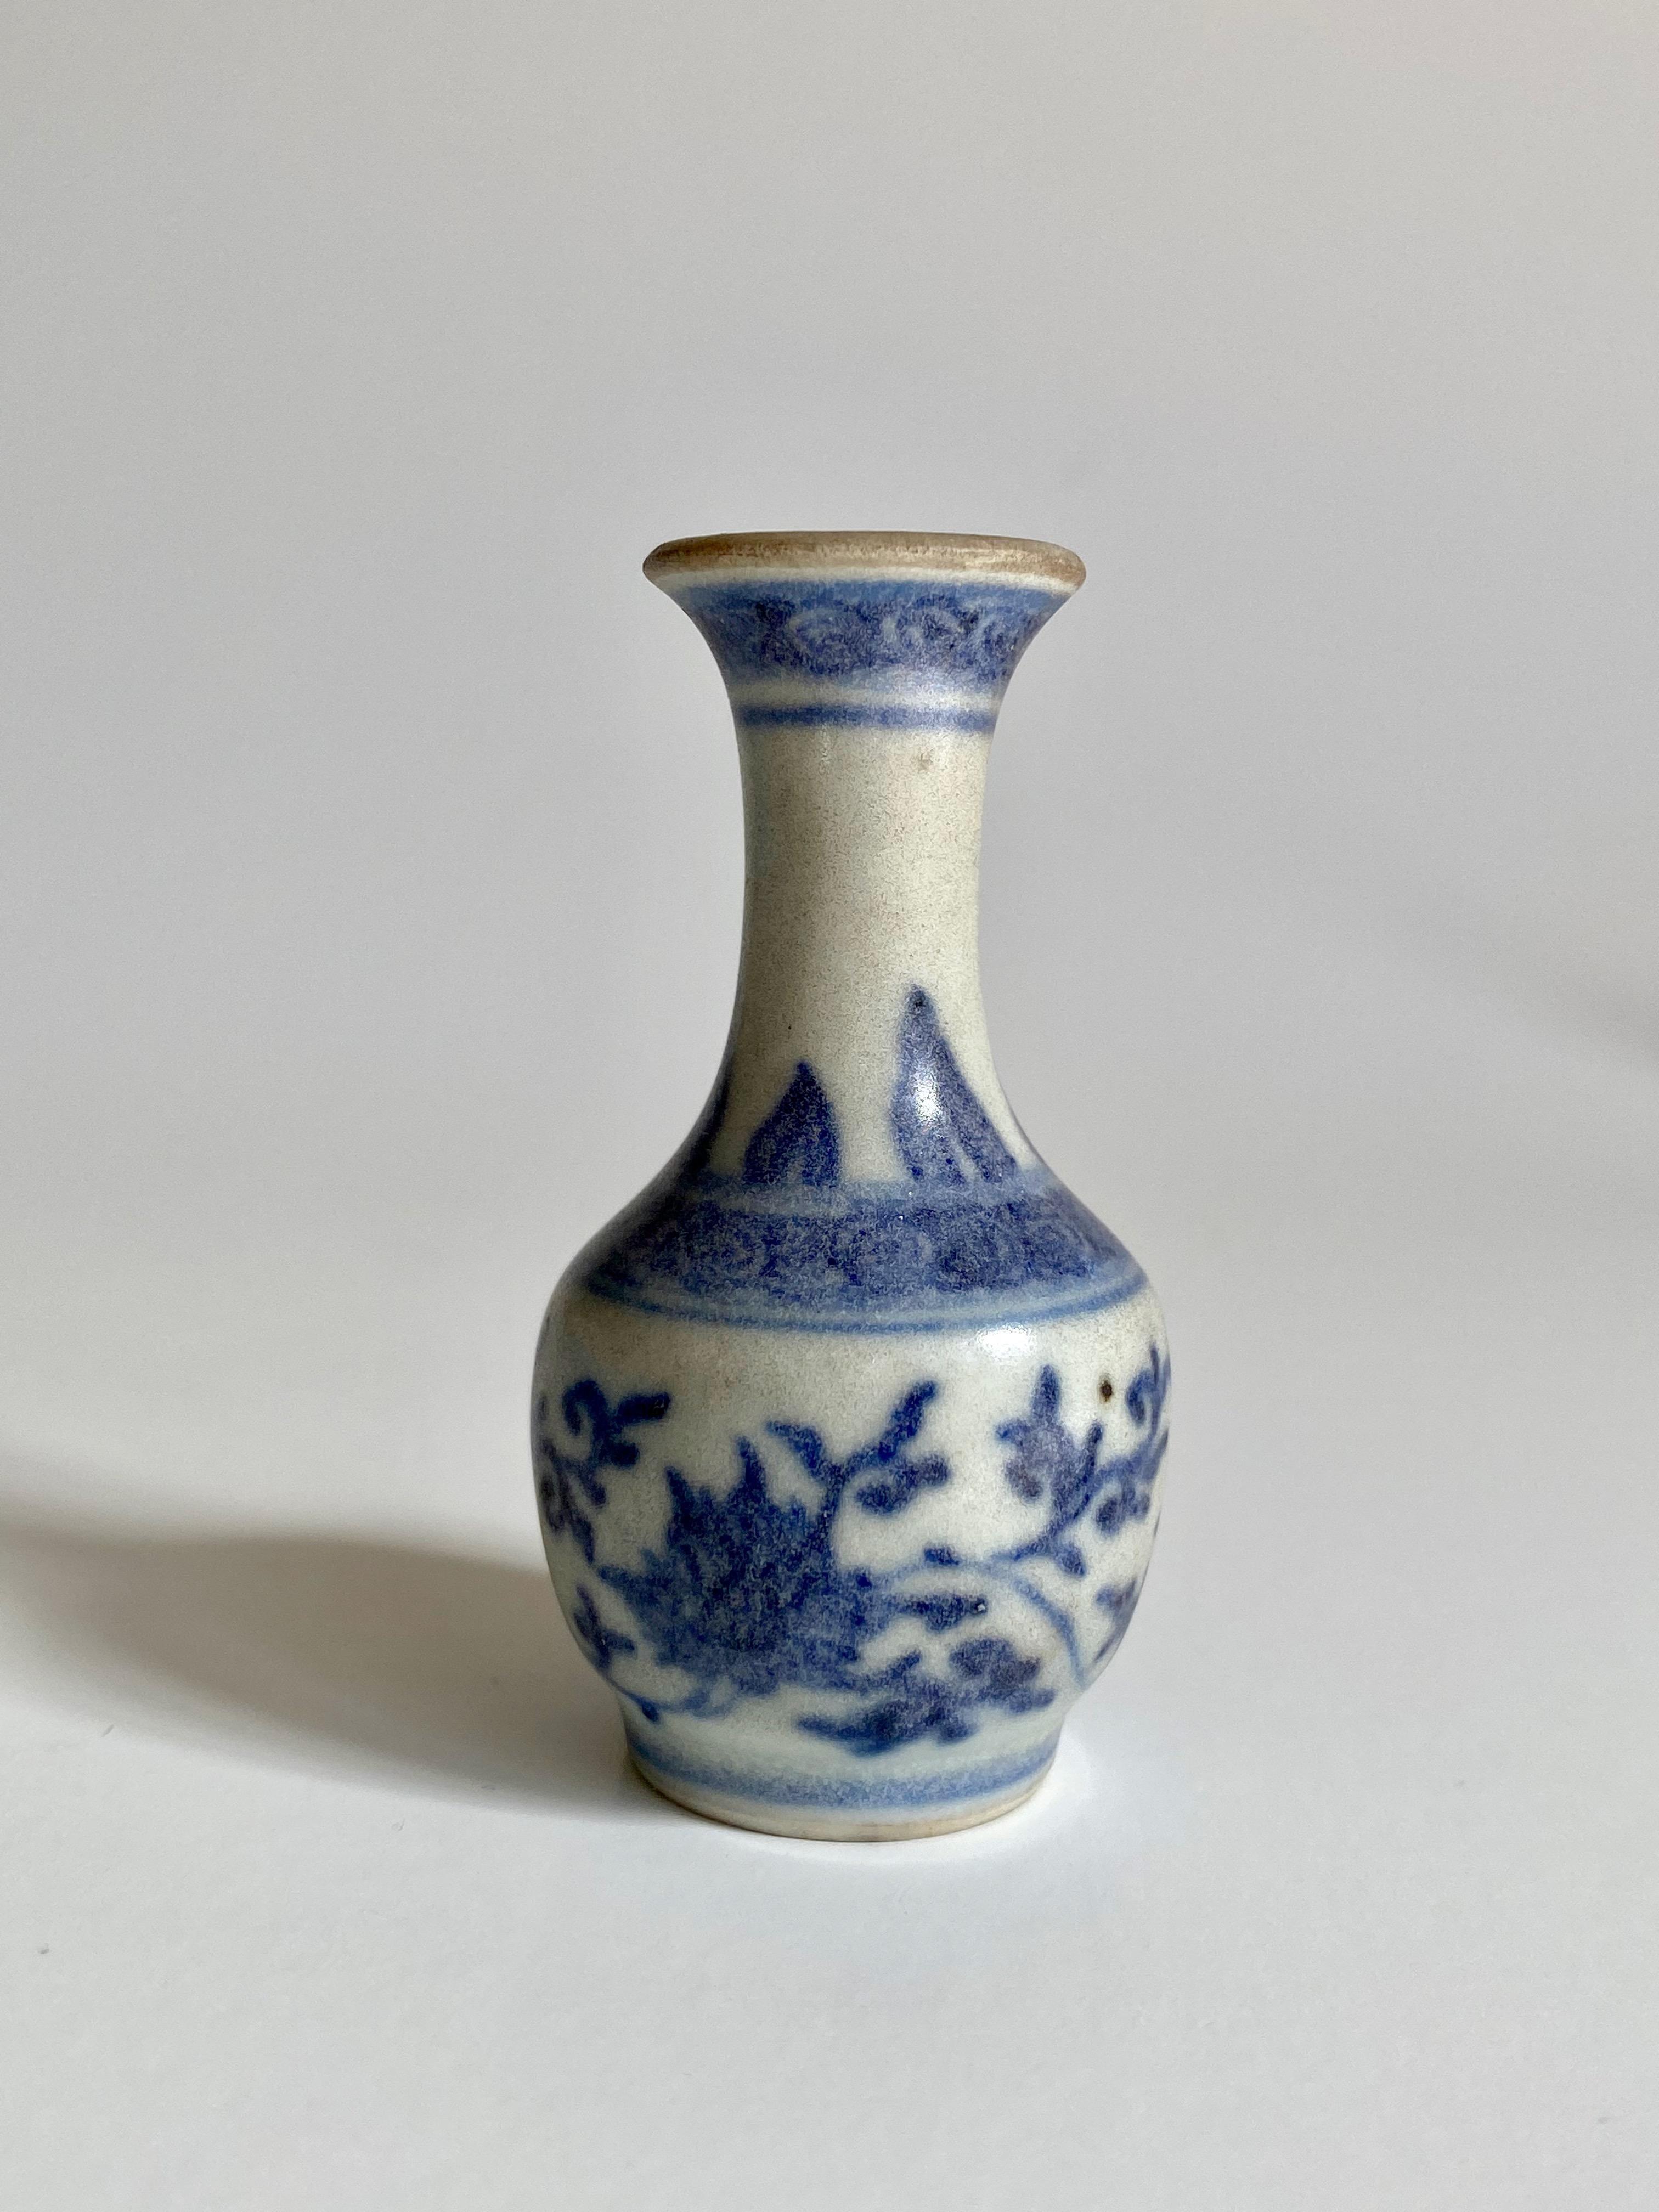 Miniature 17th century blue and white vase with a flared rim and three bands of decoration 
 
This miniature vase was part of a hoard recovered by Captain Michael Hatcher from the wreck of a ship that sunk in the South China sea in approximately